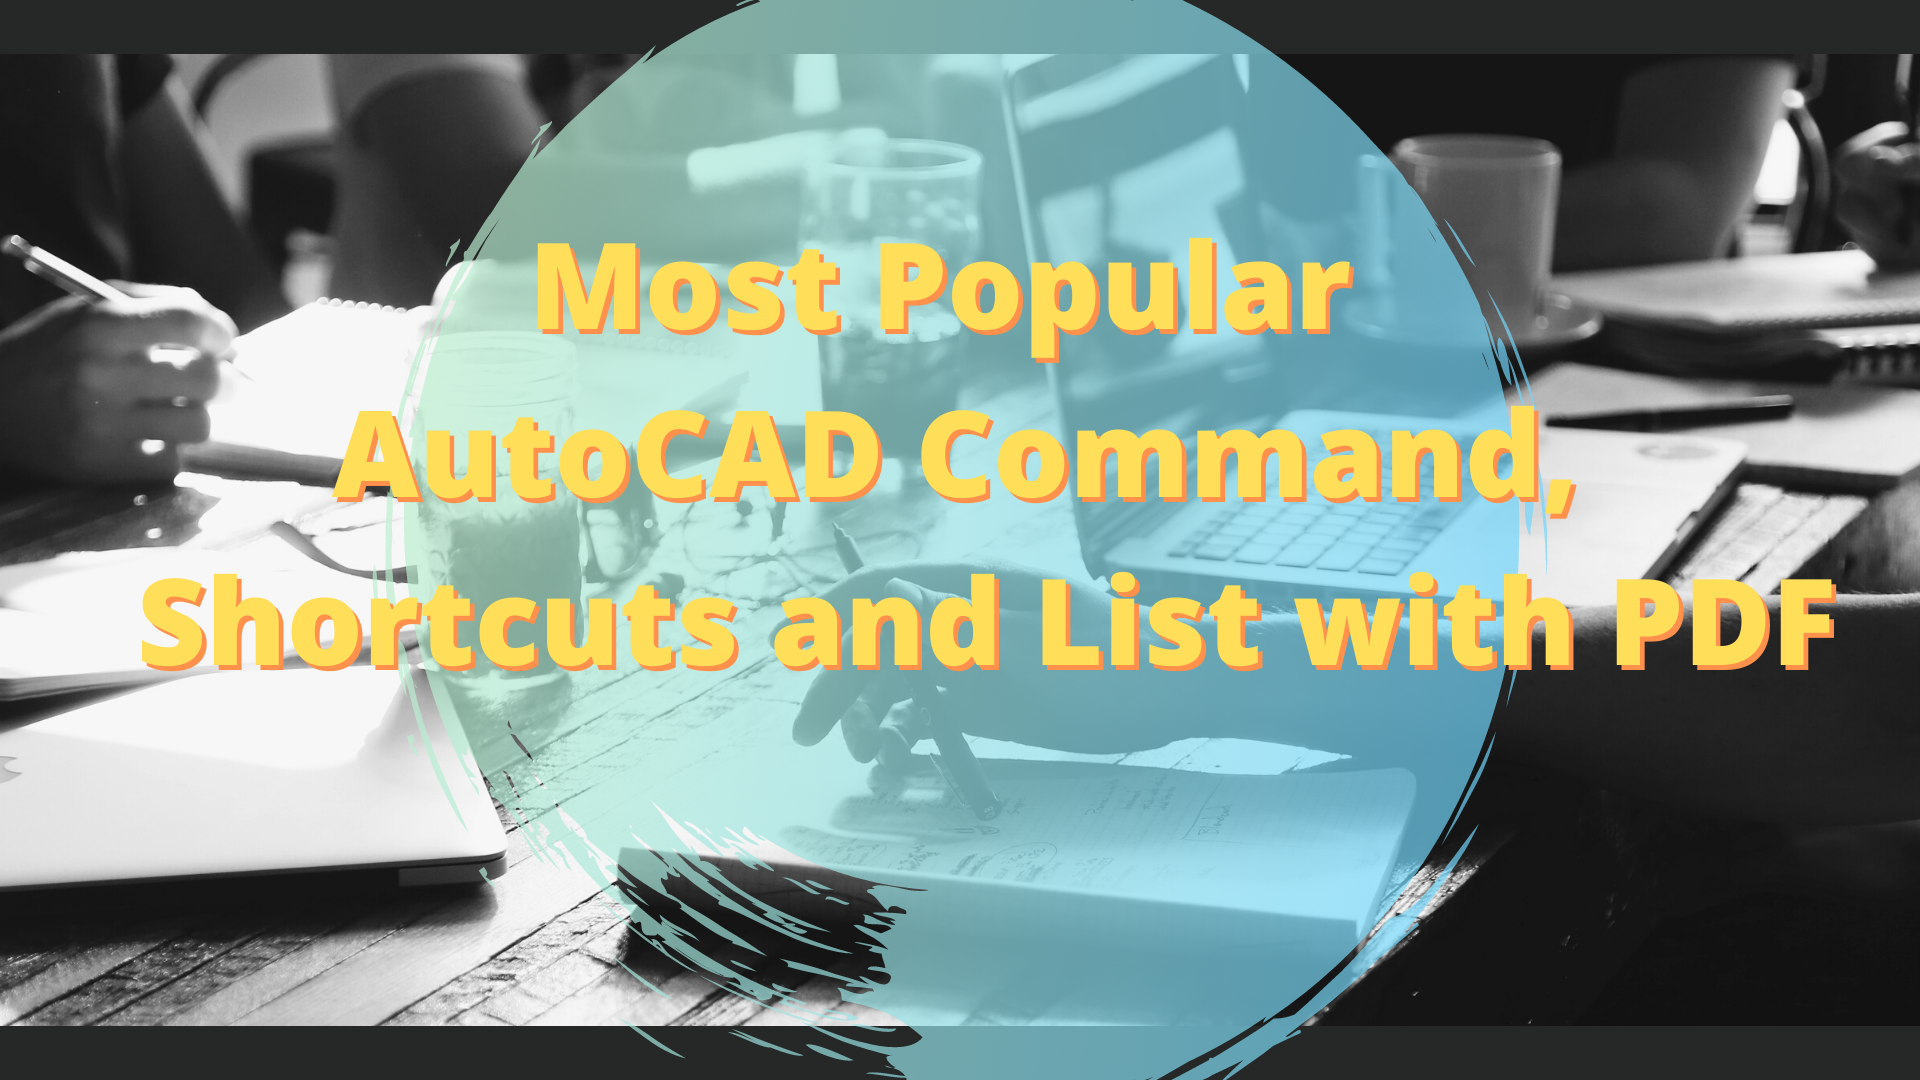 Most Popular Autocad Command, Shortcuts And List With Pdf